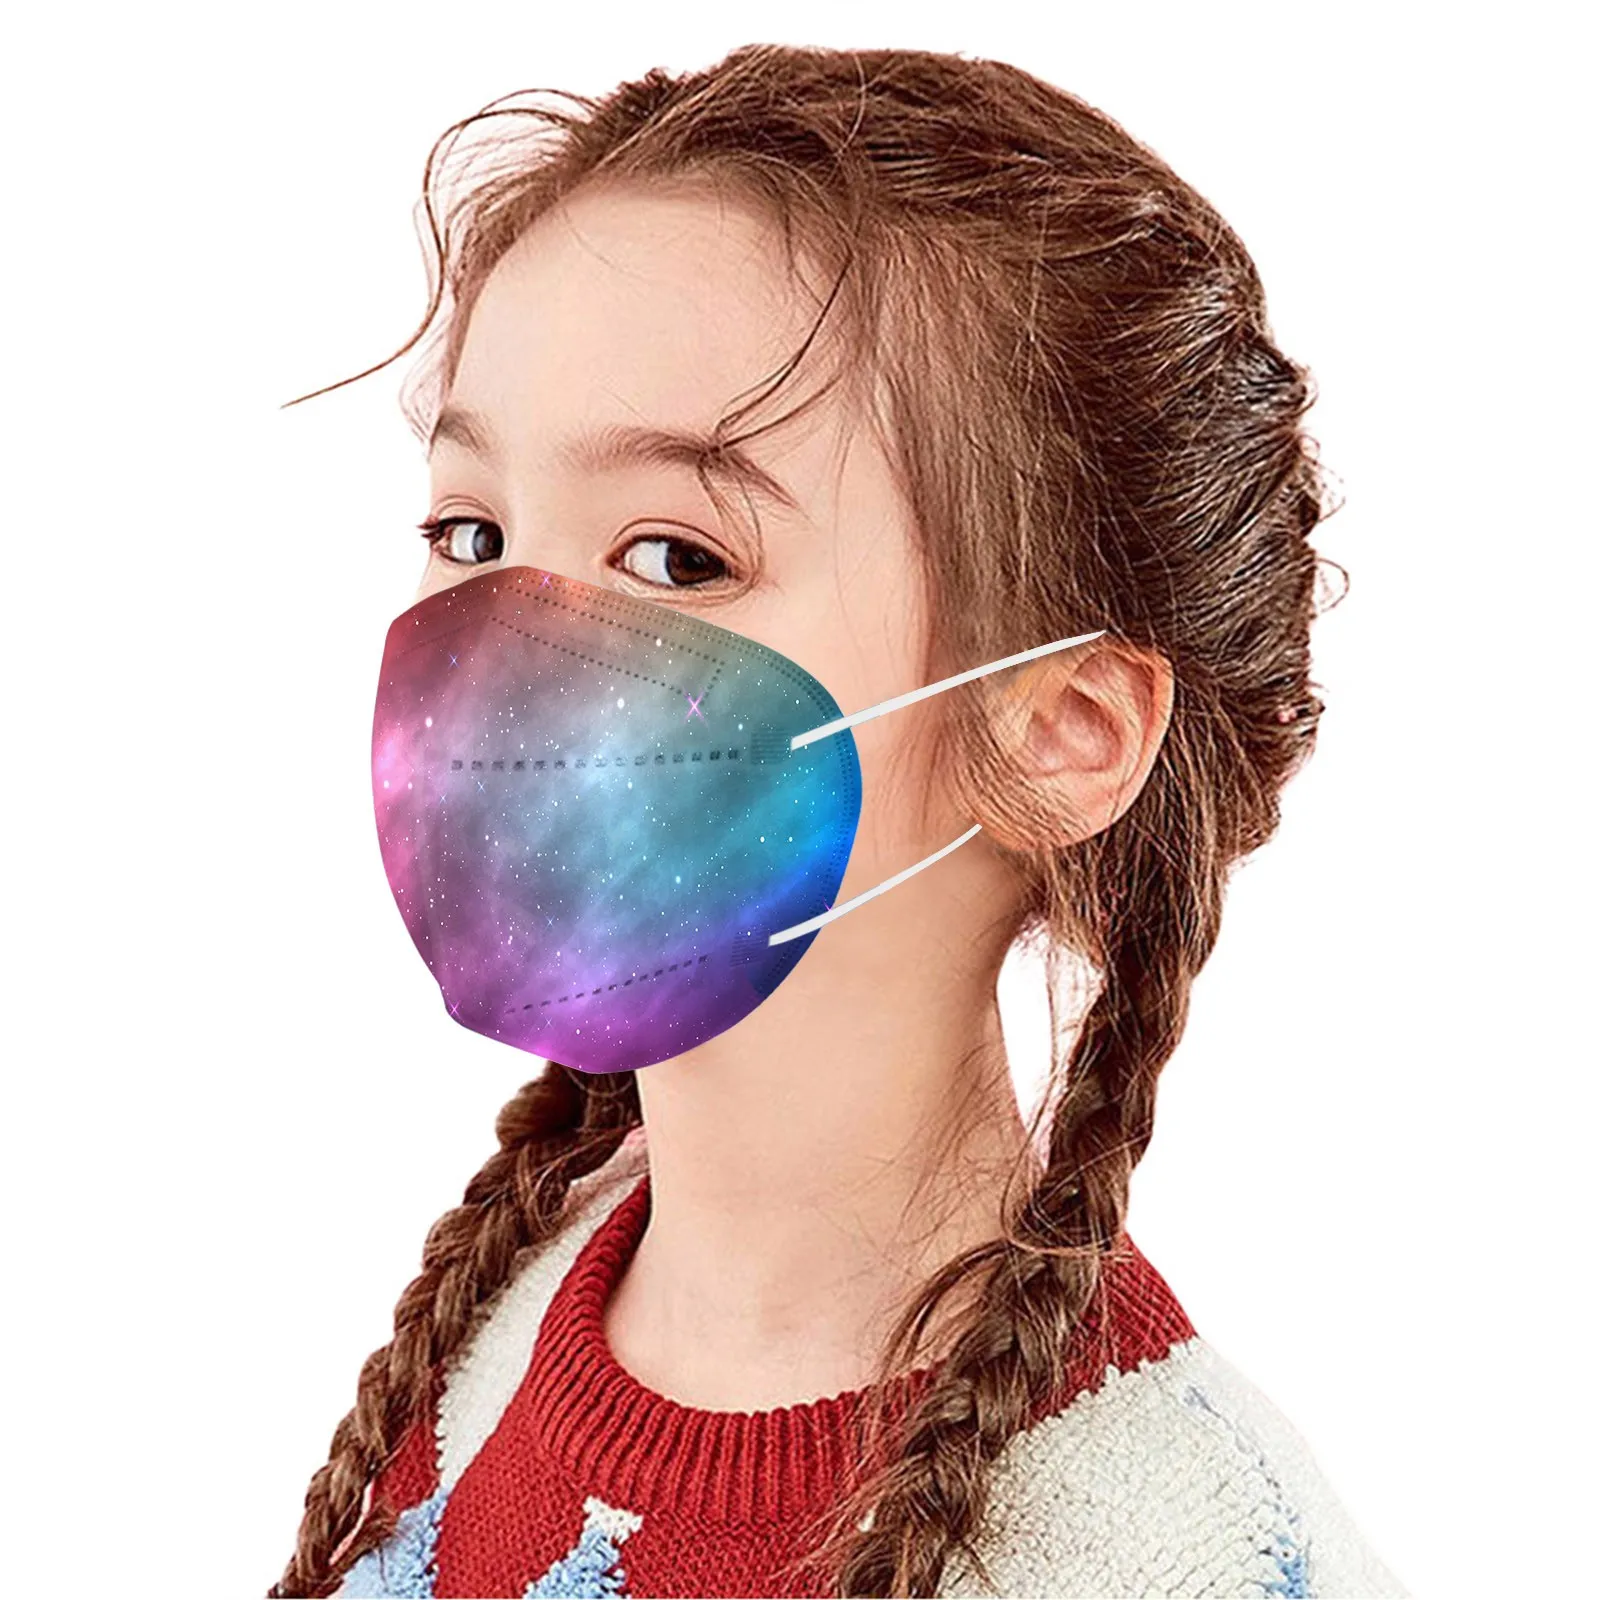 10PC Children's Mask Tie Dye Printing Mask Disposable Mask Industrial 5Ply Earloop Personal Face Mask Mascarillas Halloween cute halloween costumes